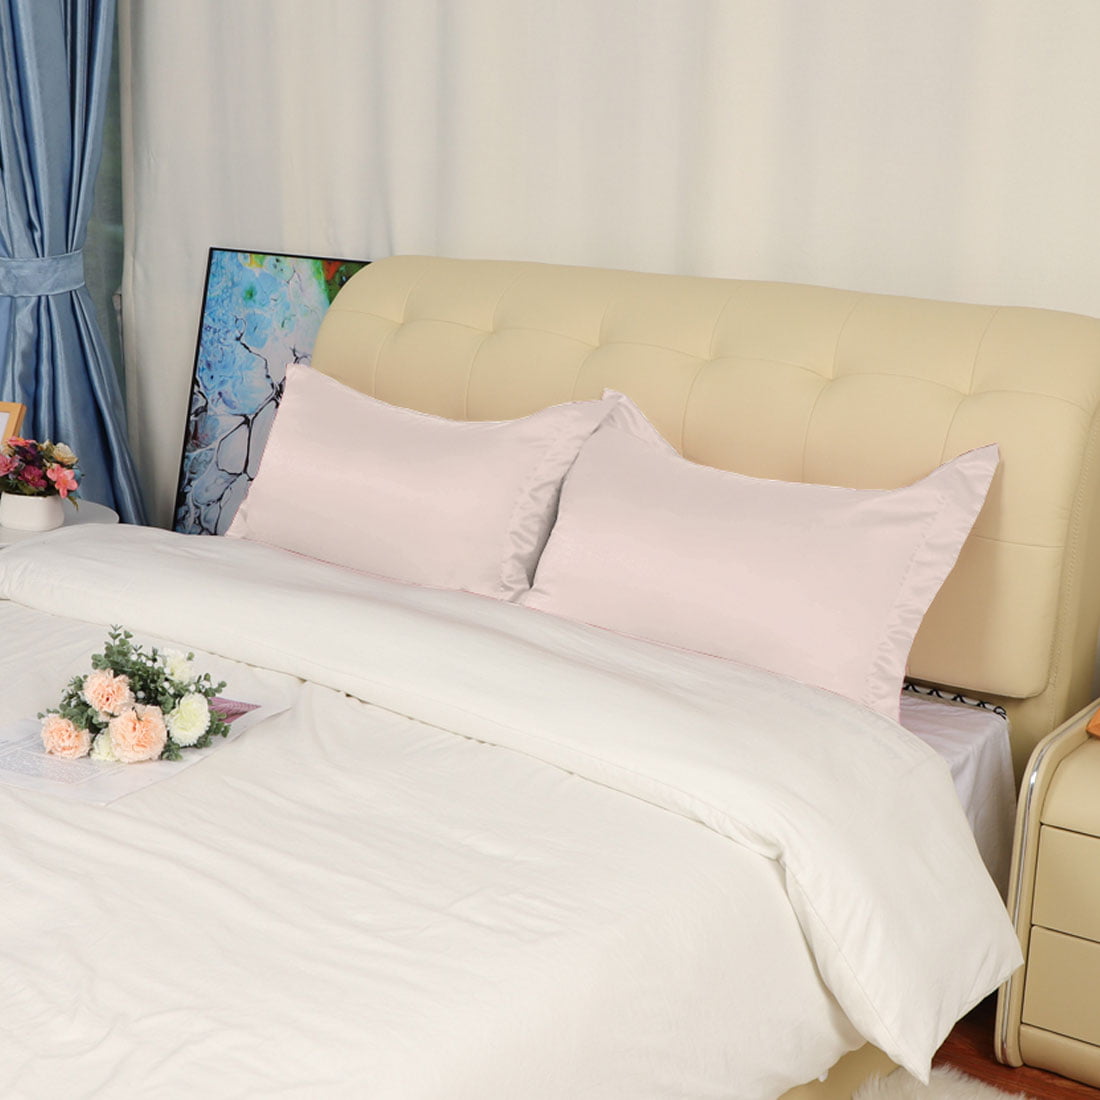 Details about   2Pcs Premium Satin Silky Bed Pillow Case Covers Pillowcases Standard Queen King 